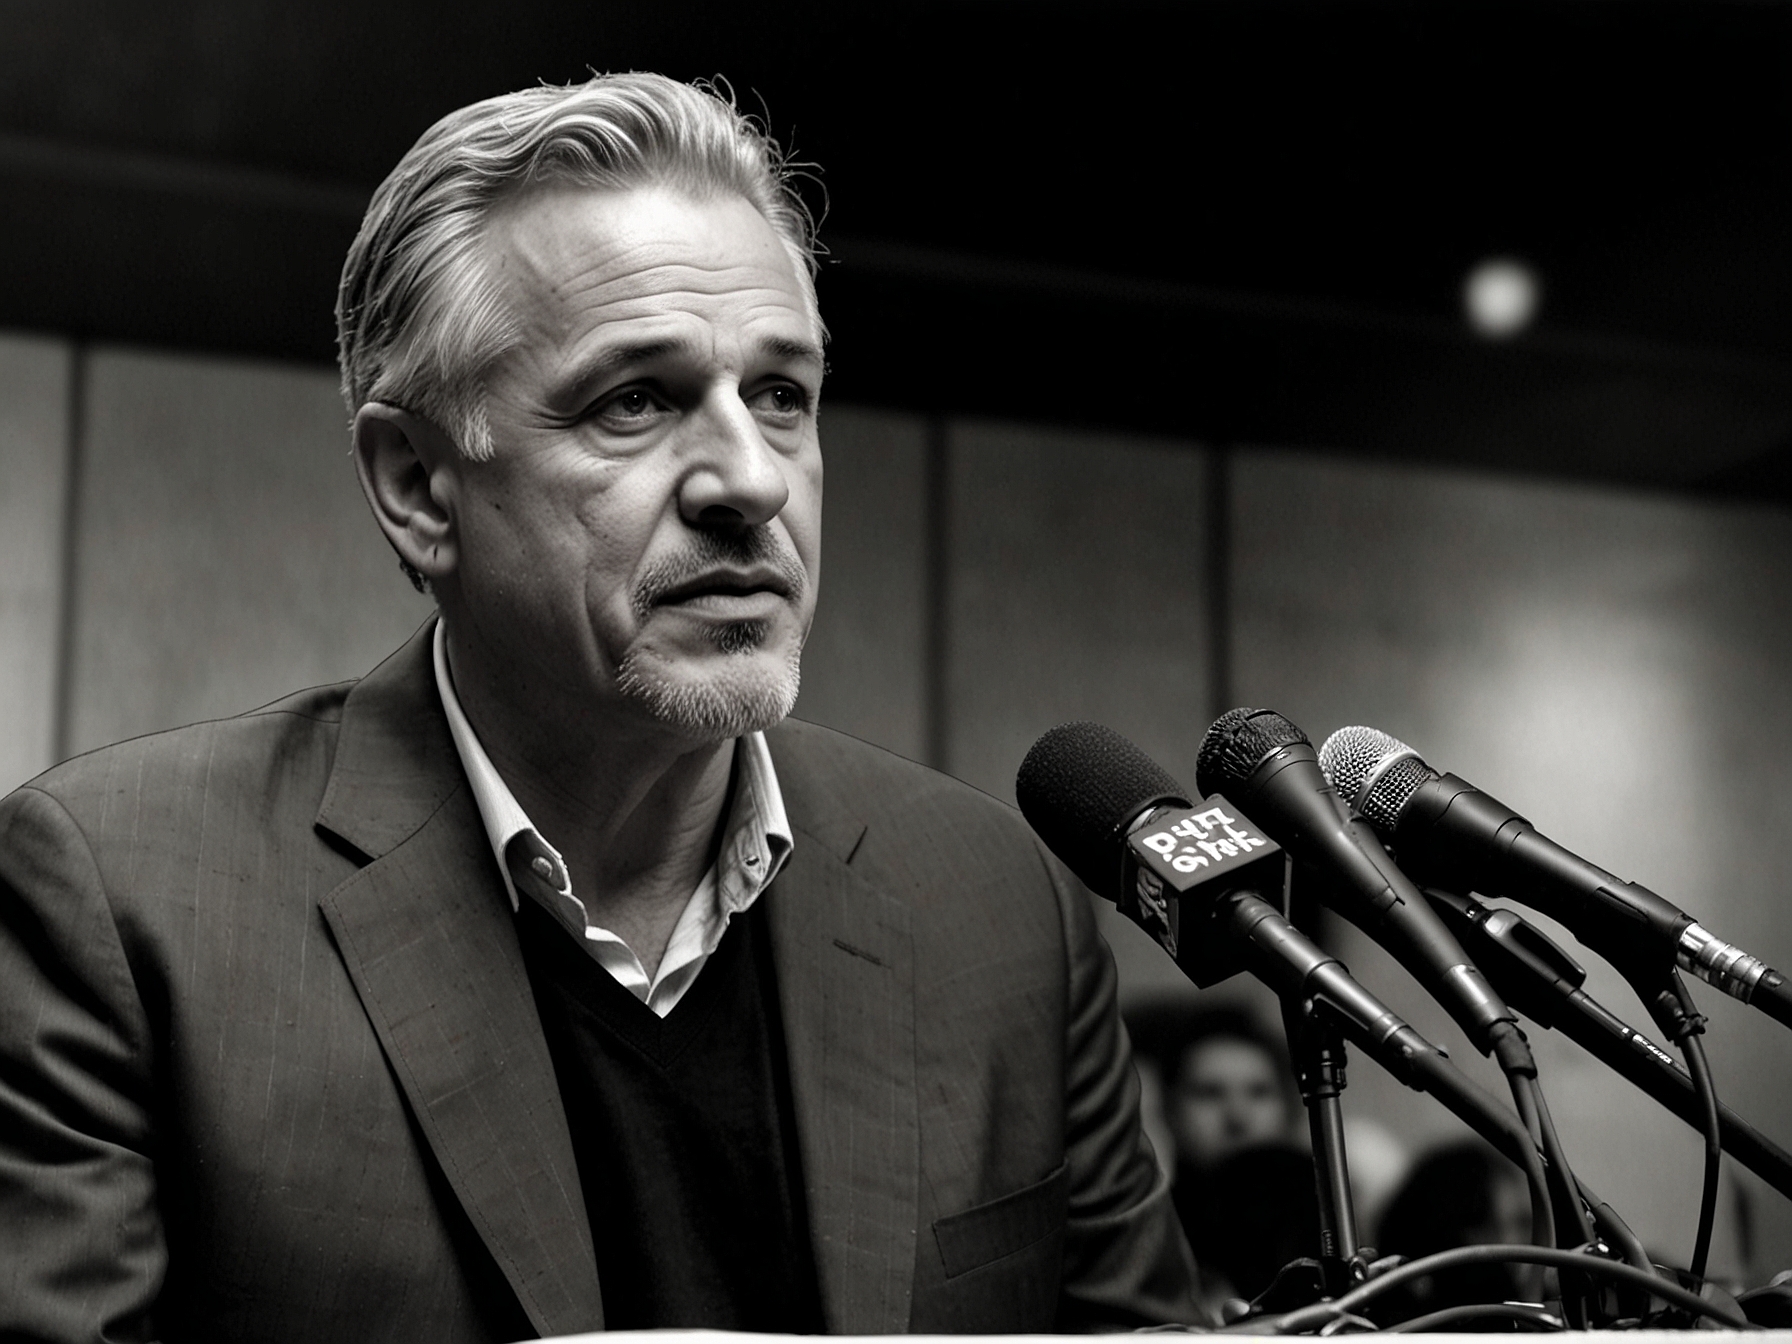 Nick Cassavetes, speaking earnestly at a press conference. The filmmaker addresses his mother's Alzheimer's diagnosis, urging for increased awareness, compassion, and research funding.